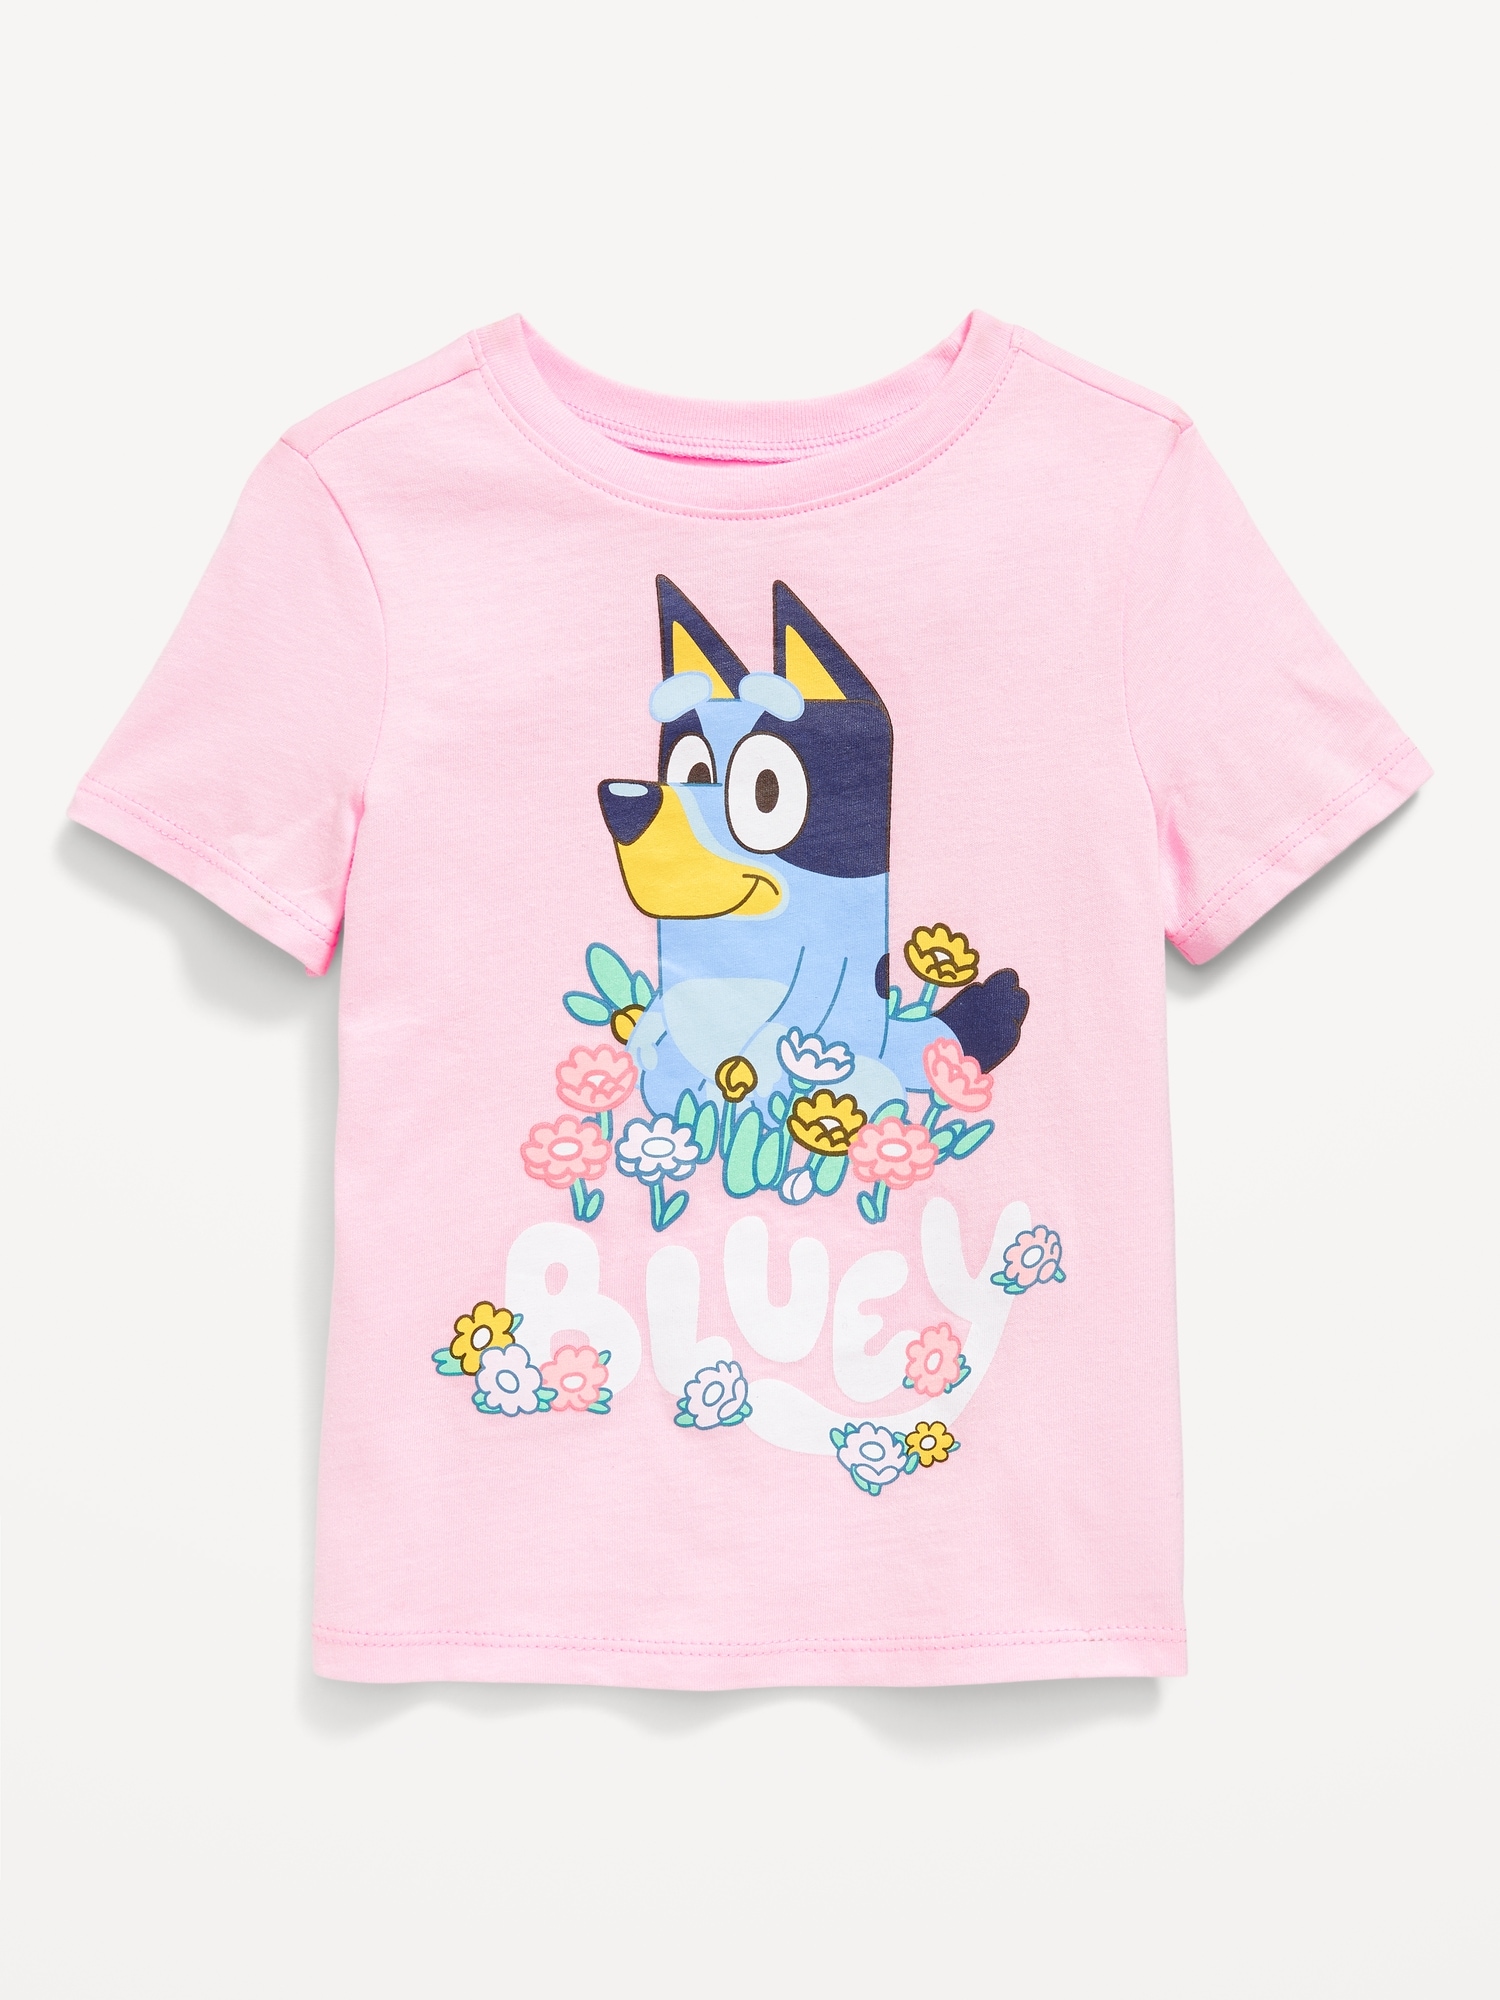 Bluey Graphic T-Shirt for Toddler Girls